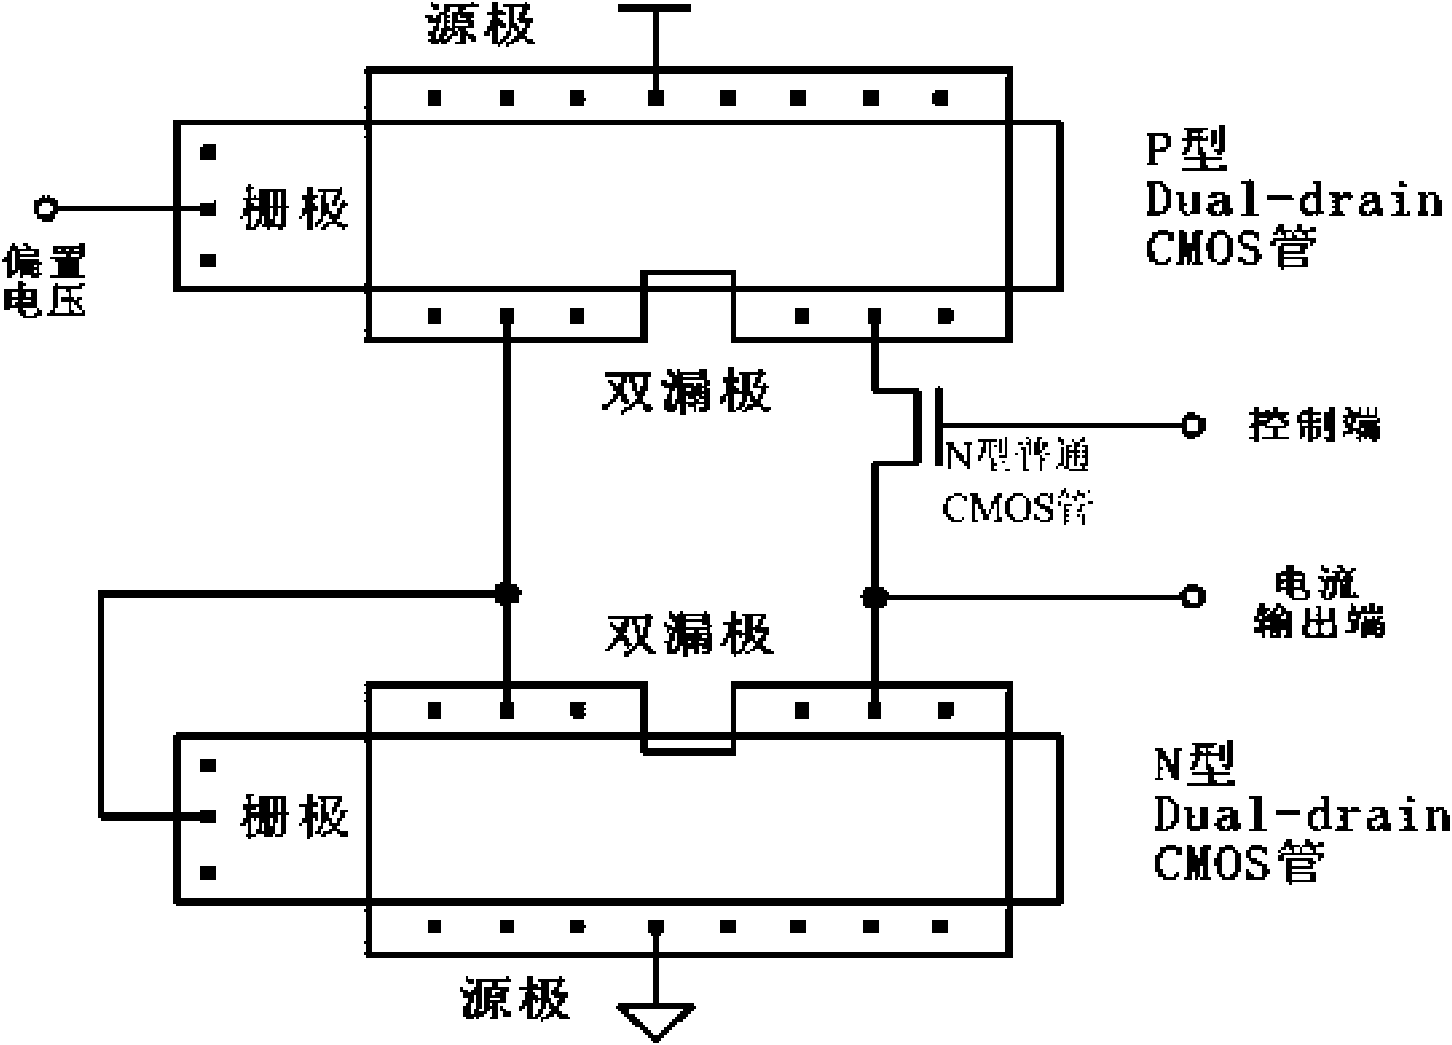 CMOS (Complementary Metal Oxide Semiconductor) random number generator